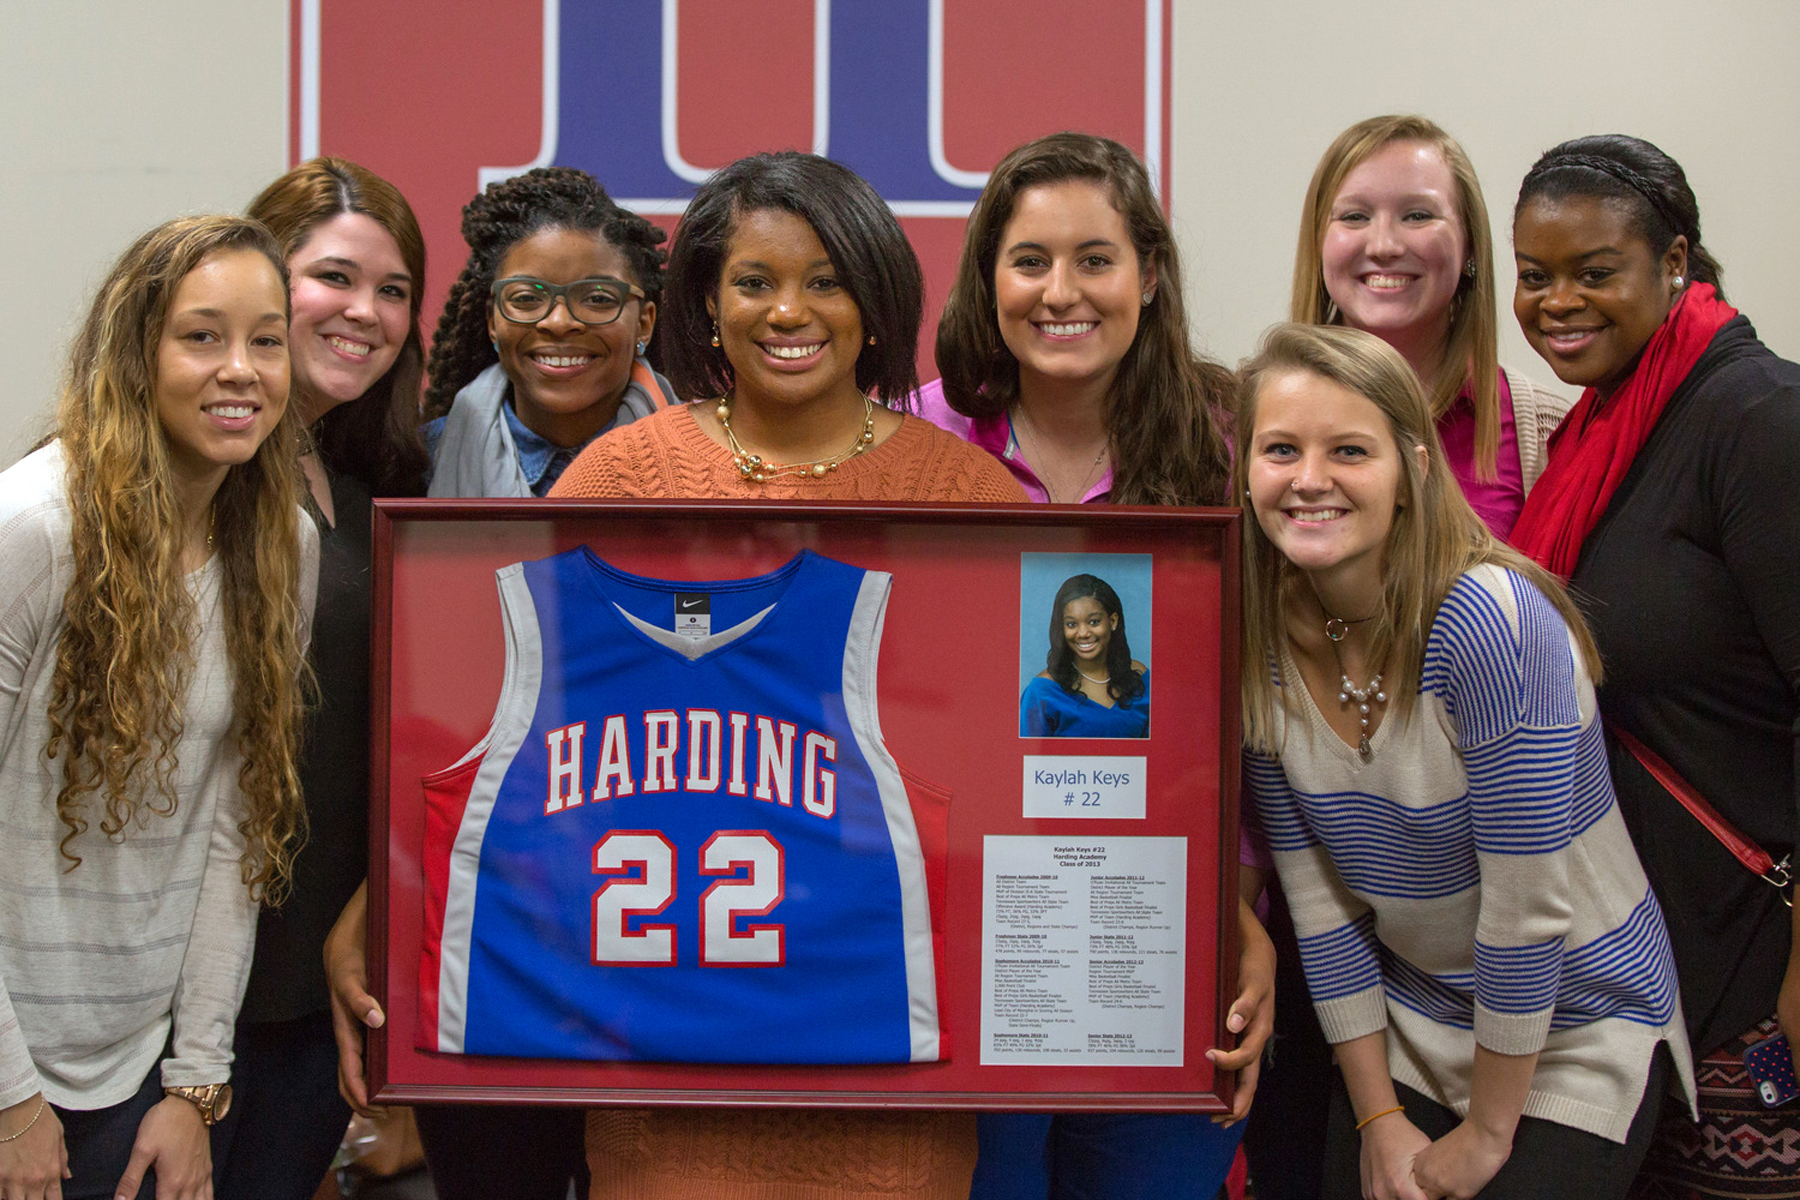 We loved having so many alumni on campus as we retired Kaylah Keys' #22 basketball jersey (especially these teammates from the 2010 State Championship team)!